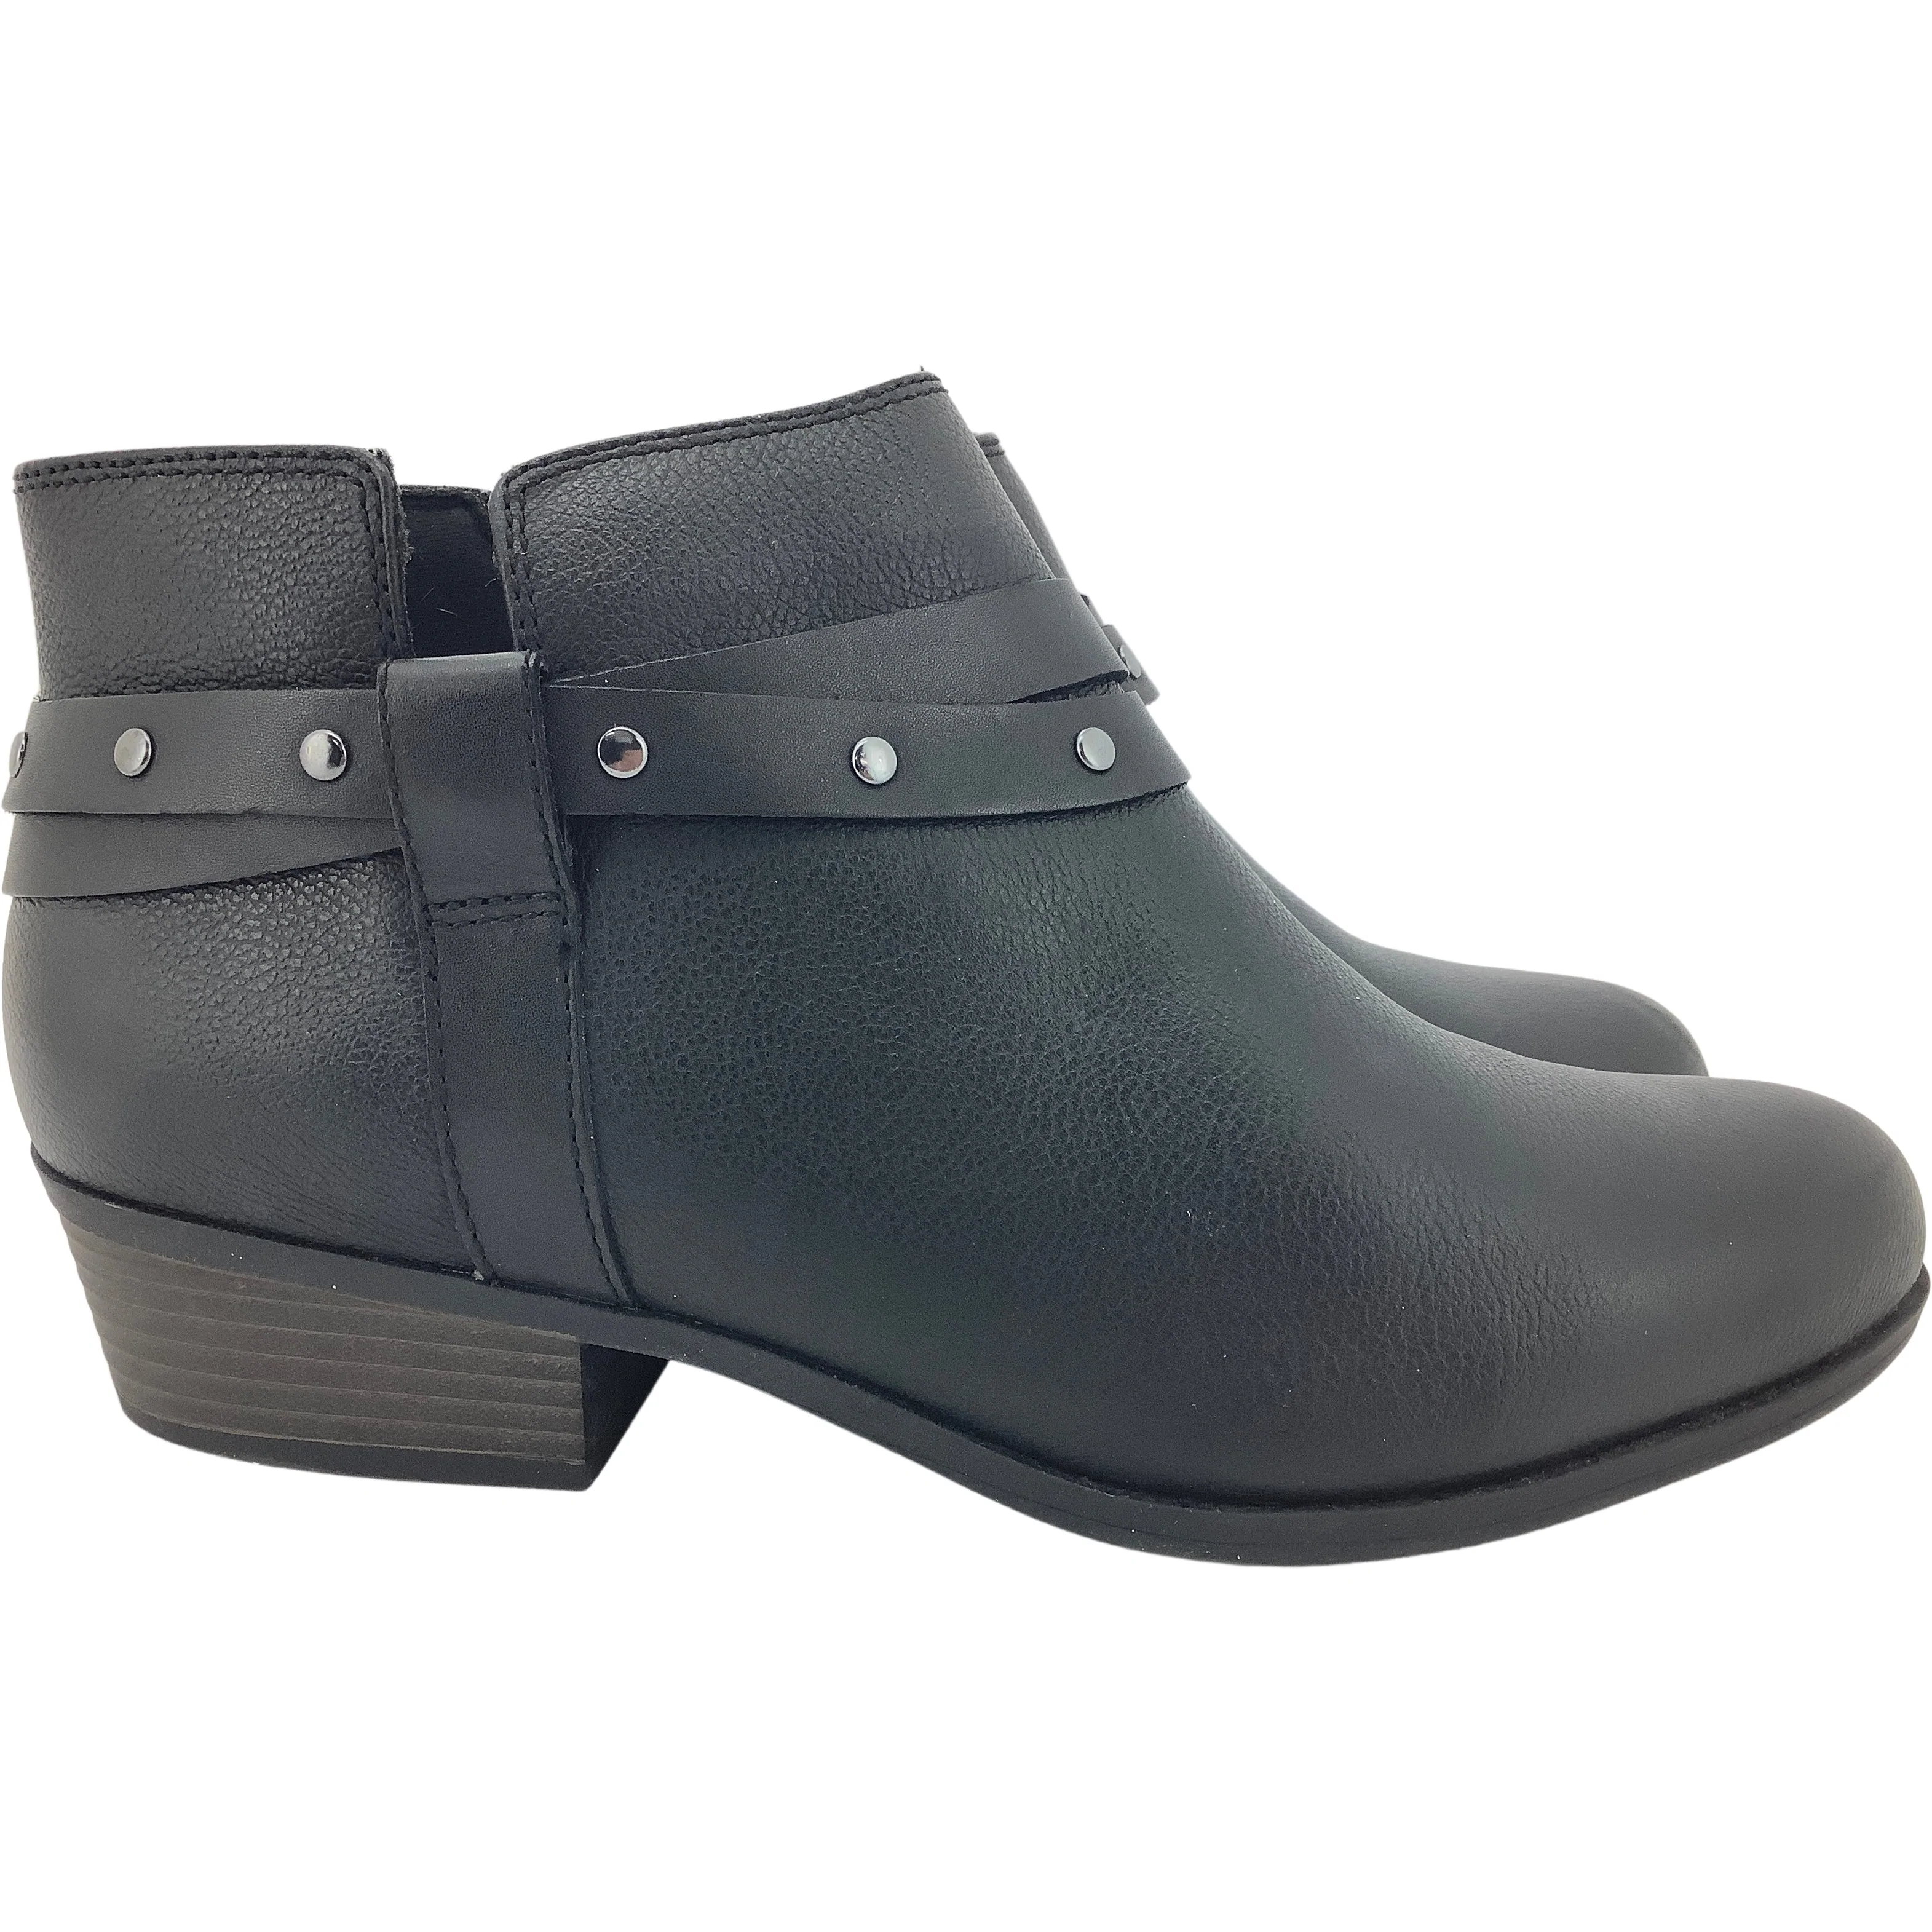 Clarks Women's Ankle Boots / Black / Women's Leather Boots / Size 9